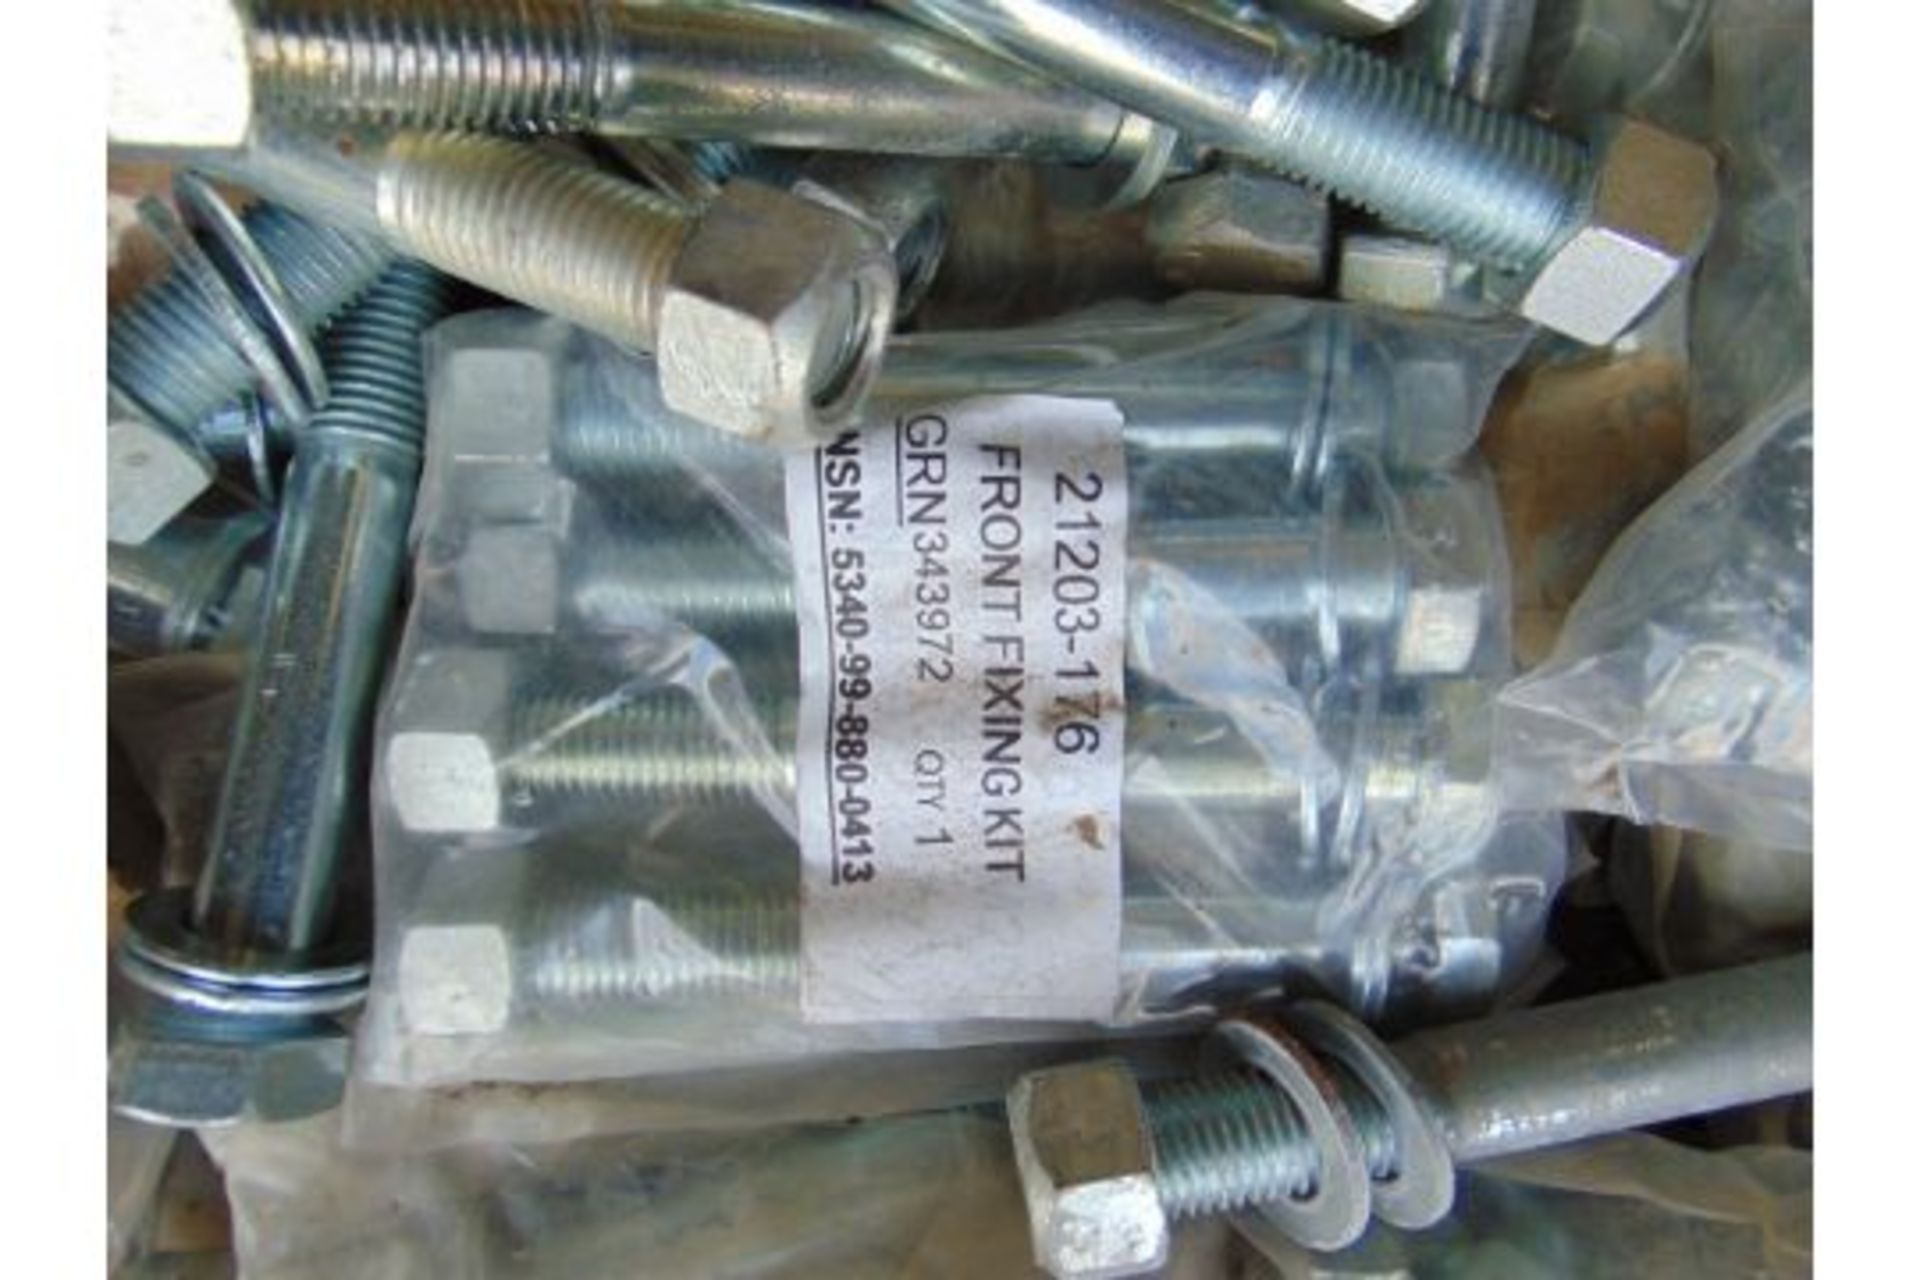 Approx. 250 M20 x 150 Grade 8.8 Bolts, Washers & Nuts - Image 2 of 3